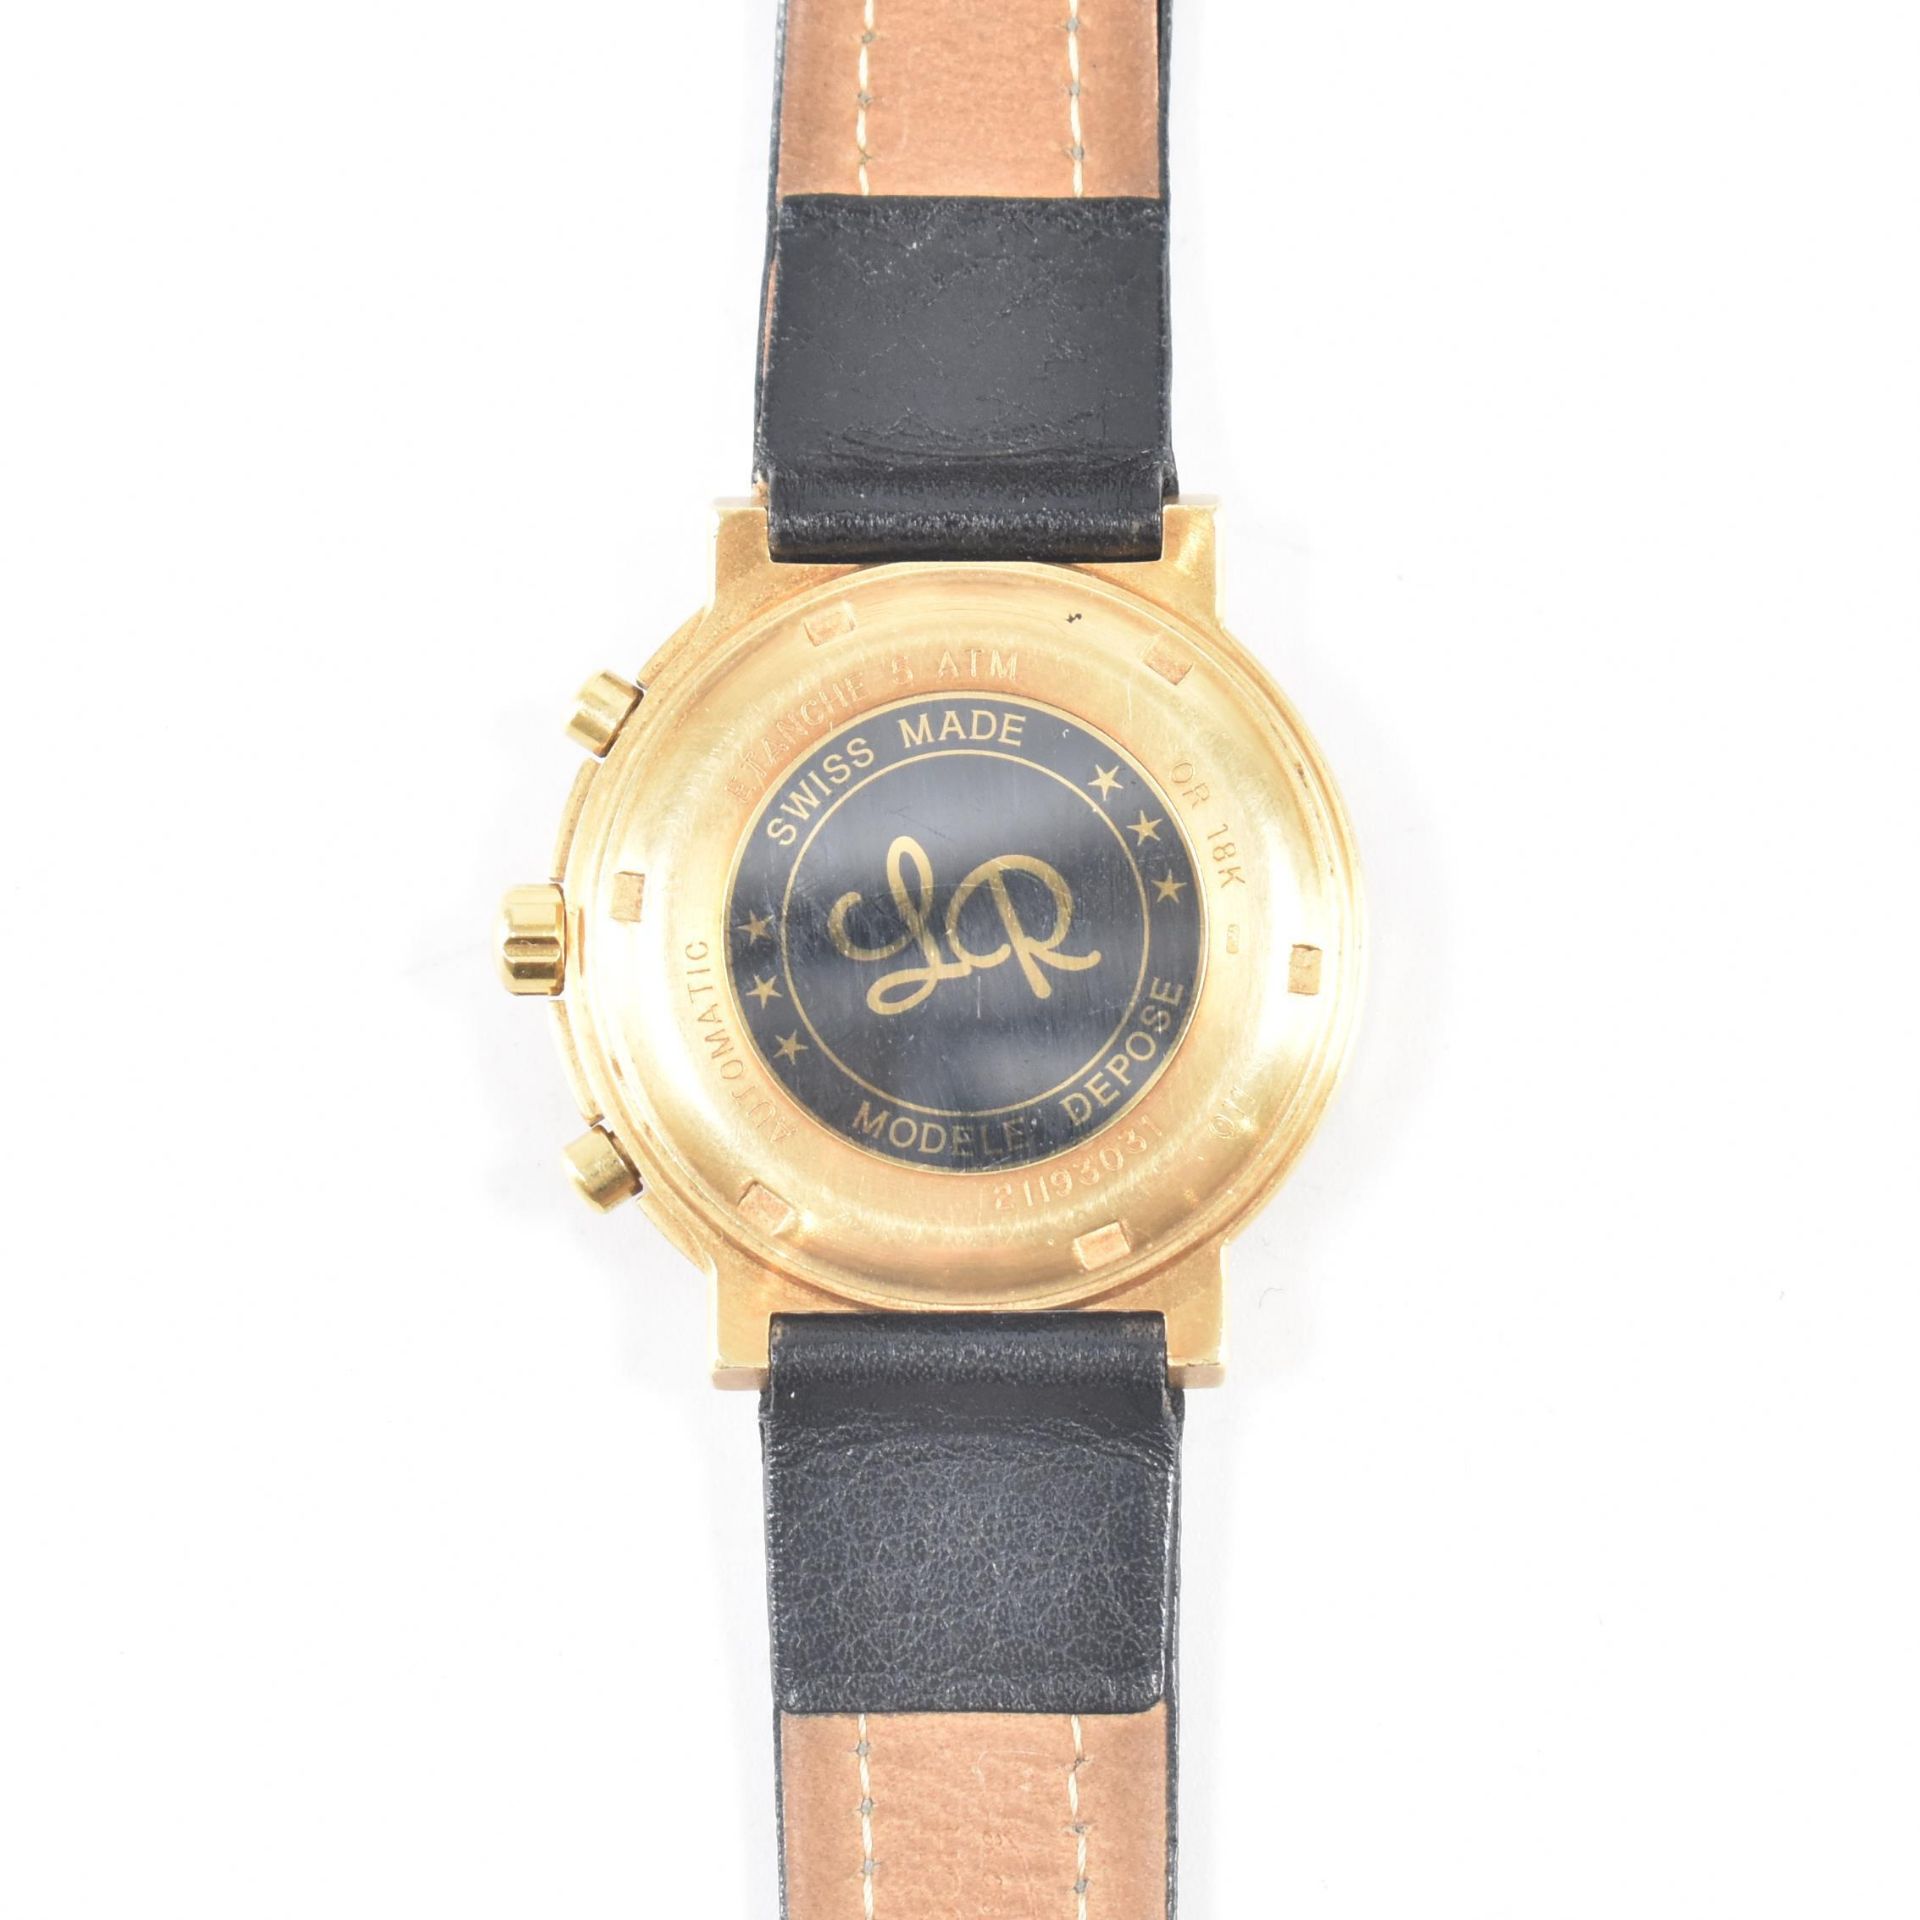 LUCIEN ROCHAT GOLD TONE & MOTHER OF PEARL WRIST WATCH - Image 2 of 4